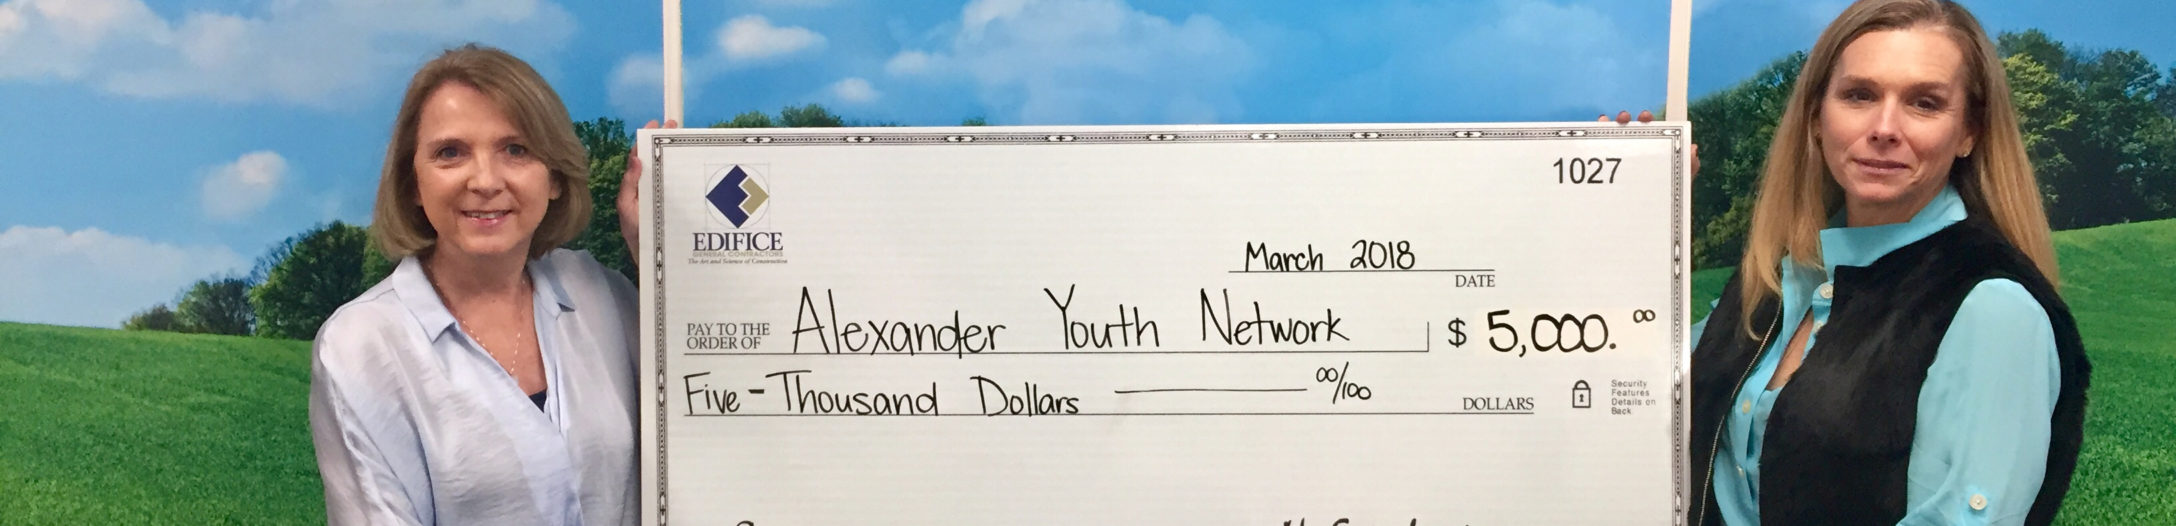 Edifice Serves as Visionary Sponsor for Alexander Youth Network